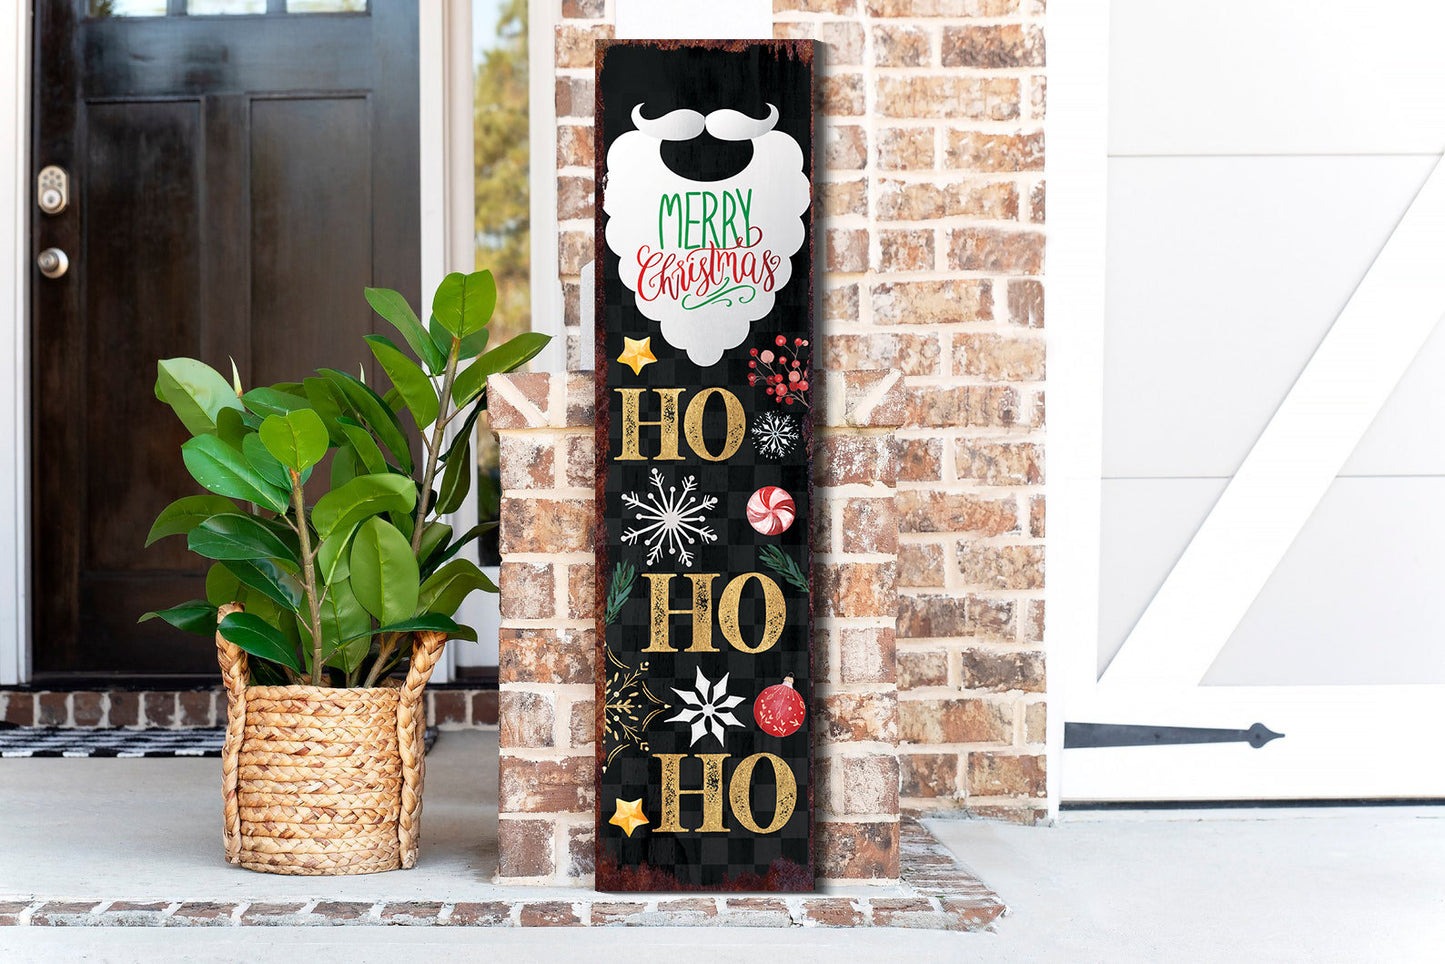 36-inch Ho Ho Ho Christmas Porch Sign - Front Porch Christmas Welcome Sign, Rustic Modern Farmhouse Entryway Board